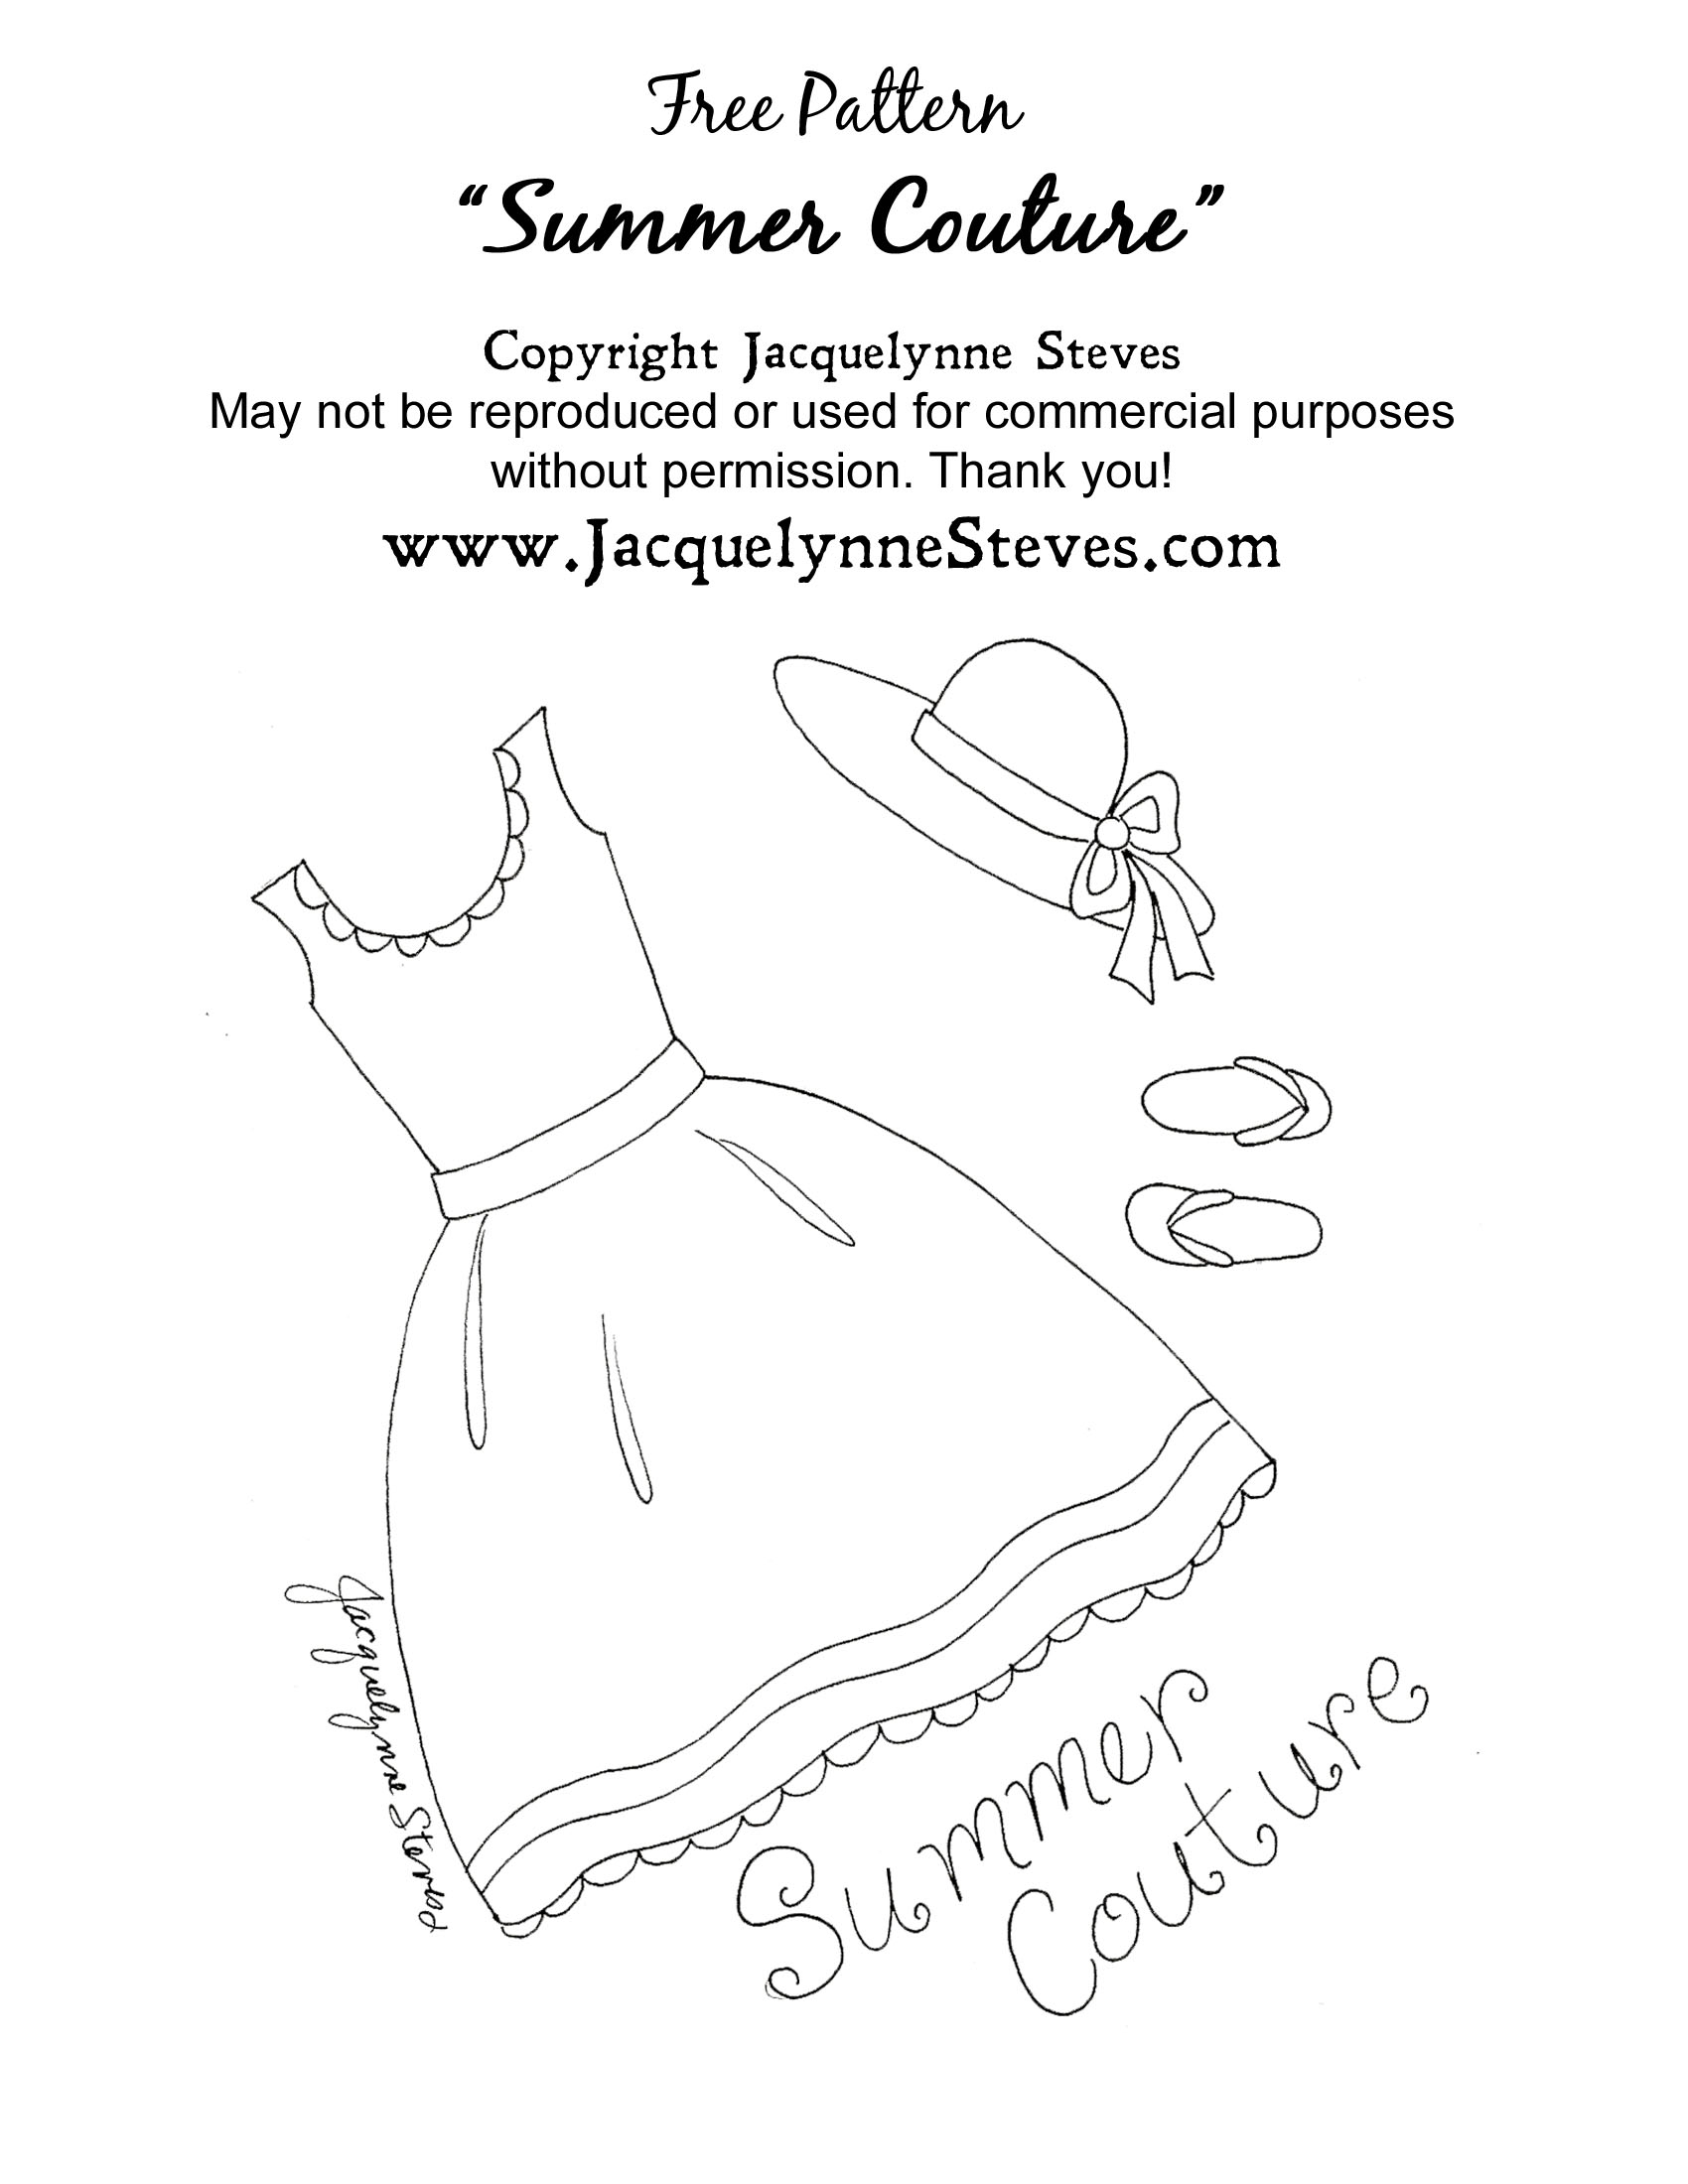 Embroidery Free Patterns Free Summer Couture Embroidery Pattern Jacquelynne Steves